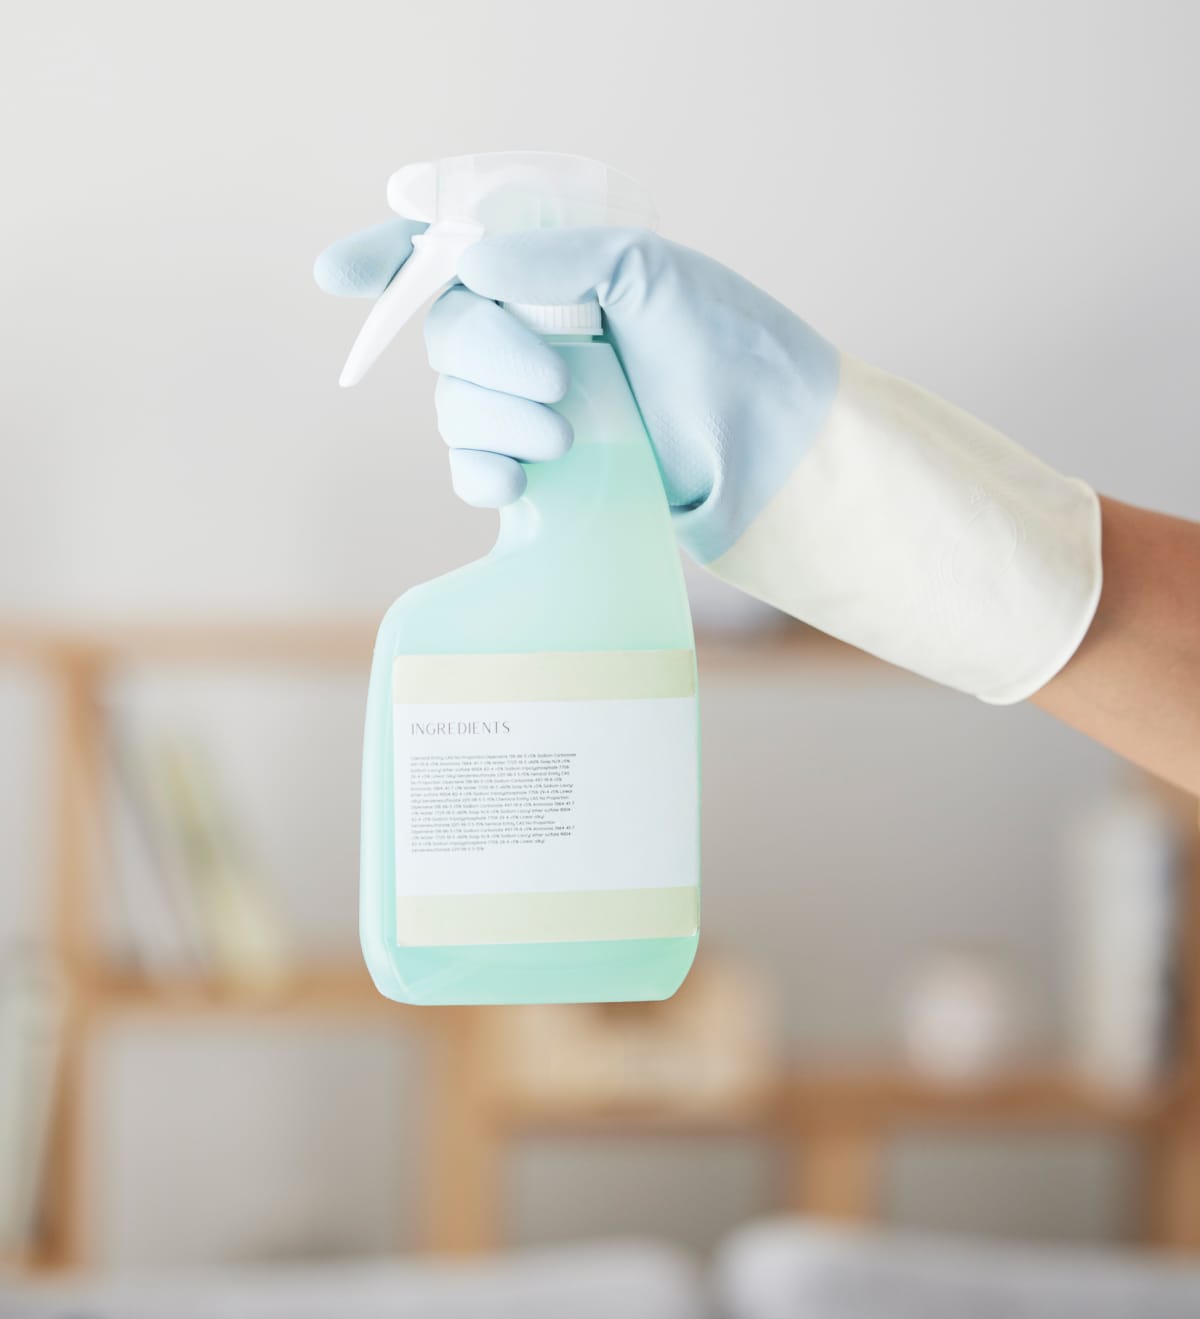 Cleaning, spray bottle and hands of woman in home for bacteria, safety and sanitary. Hygiene, chemicals and housekeeping service with cleaner and disinfection product for germs, dirt and domestic